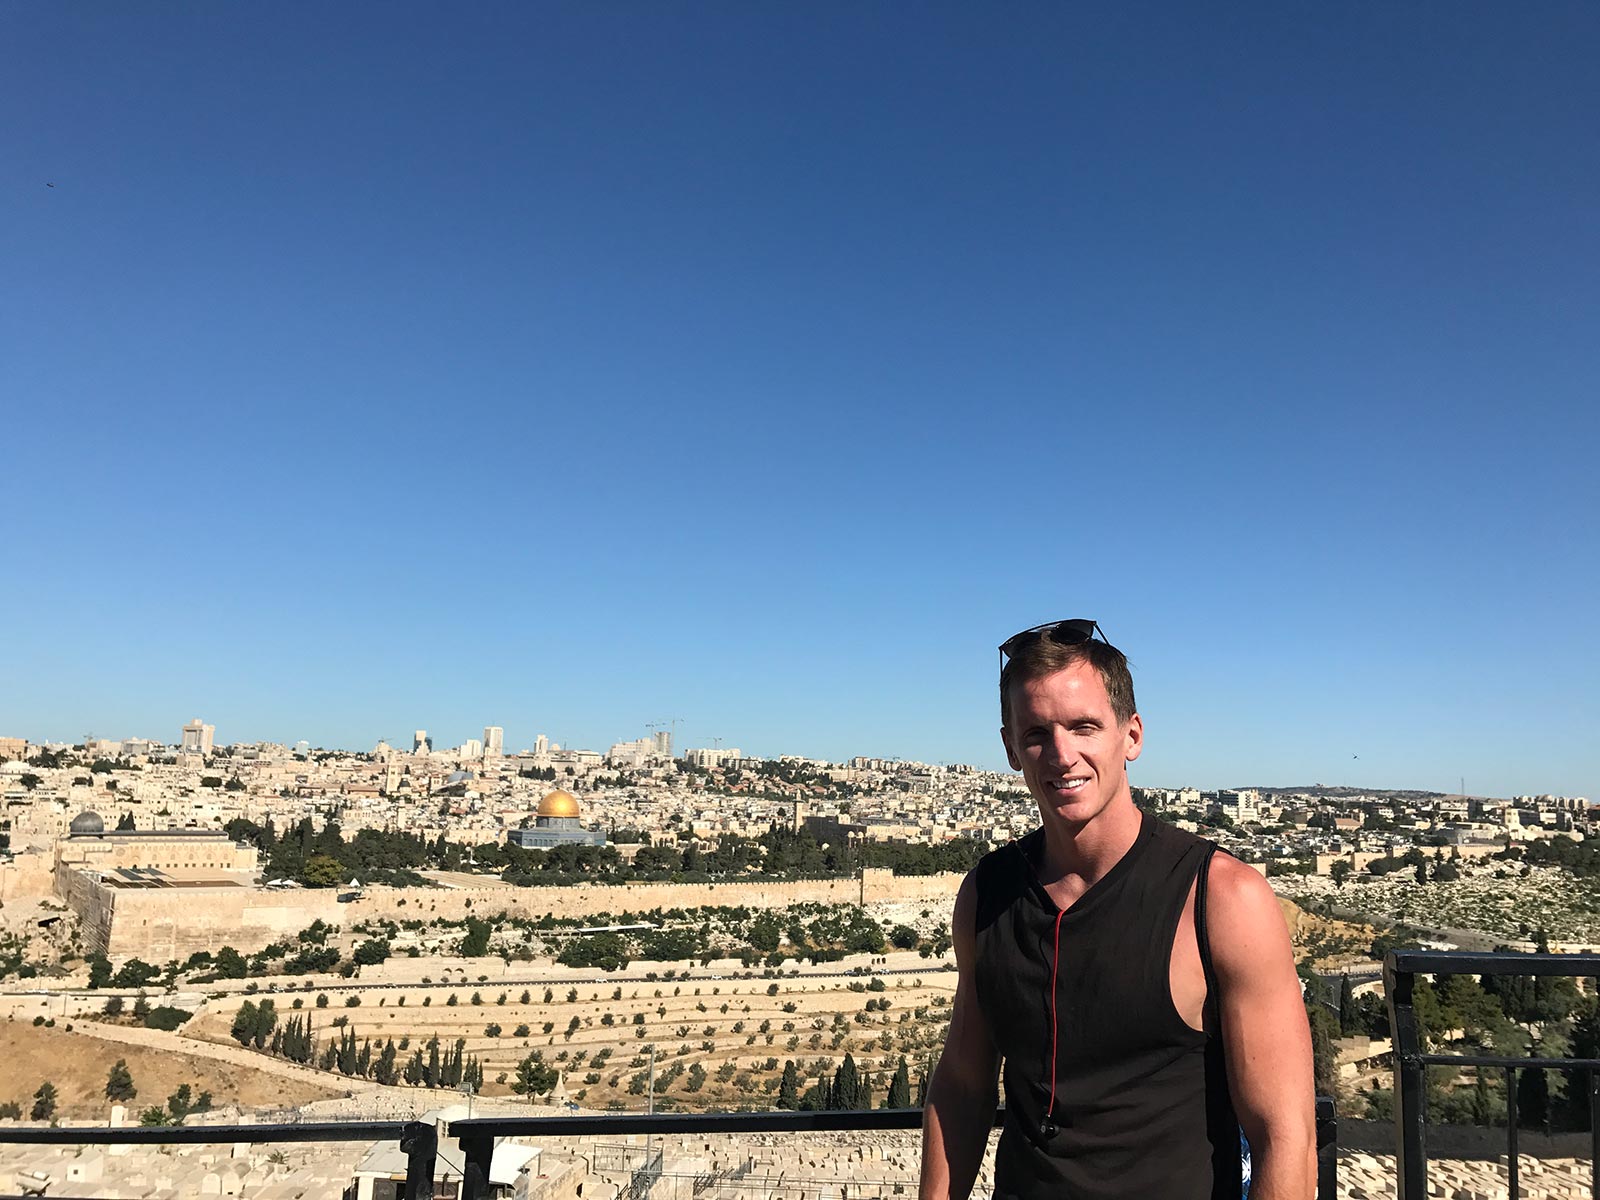 David Simpson in Jerusalem, Israel. My time in Jerusalem, a special city divided